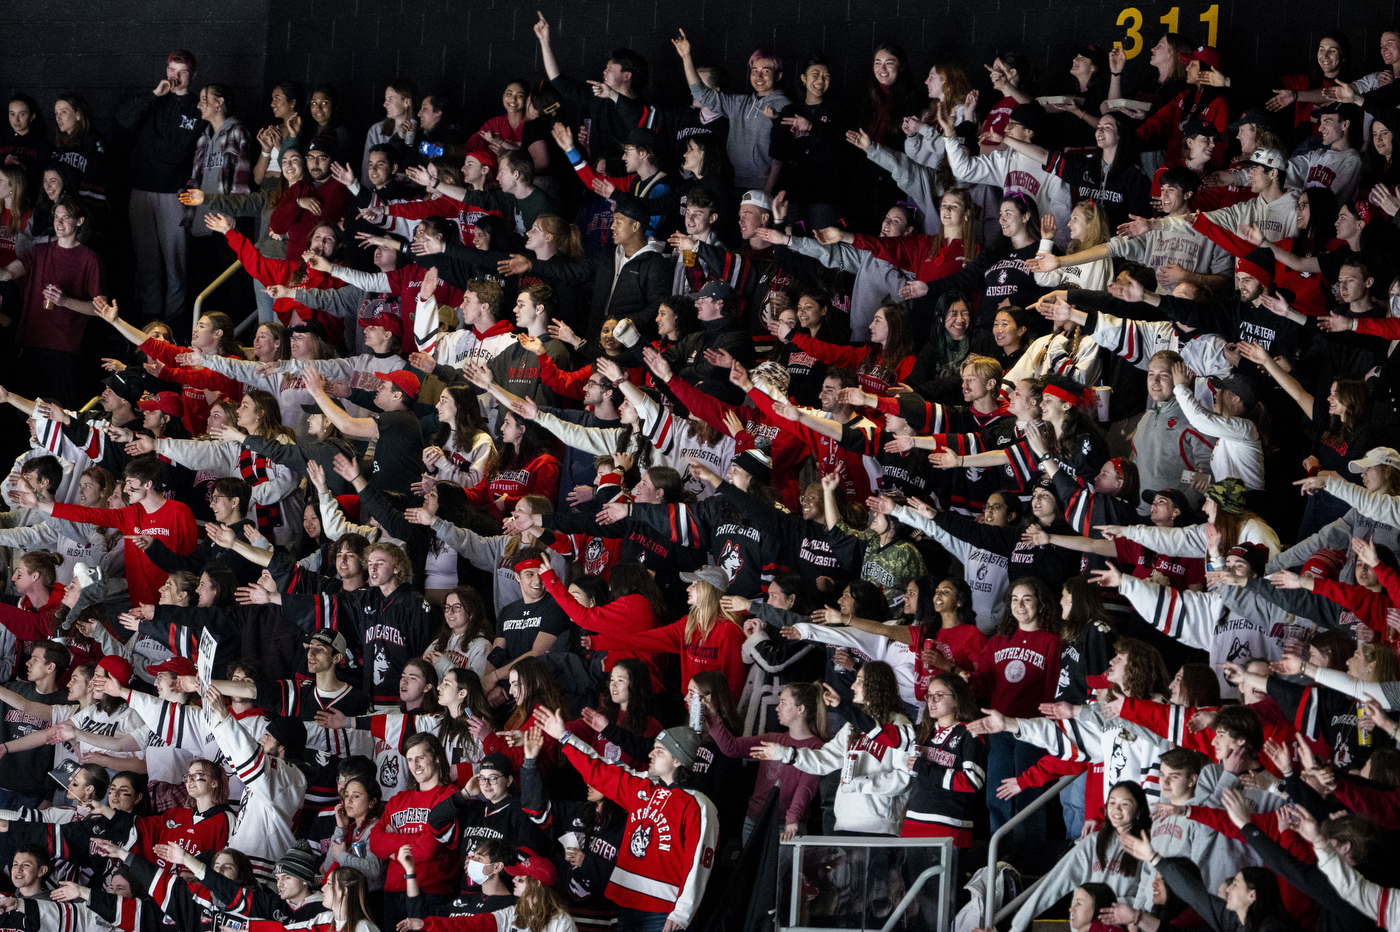 Northeastern fans in red, white and black fill the stands of TD Garden Monday night.